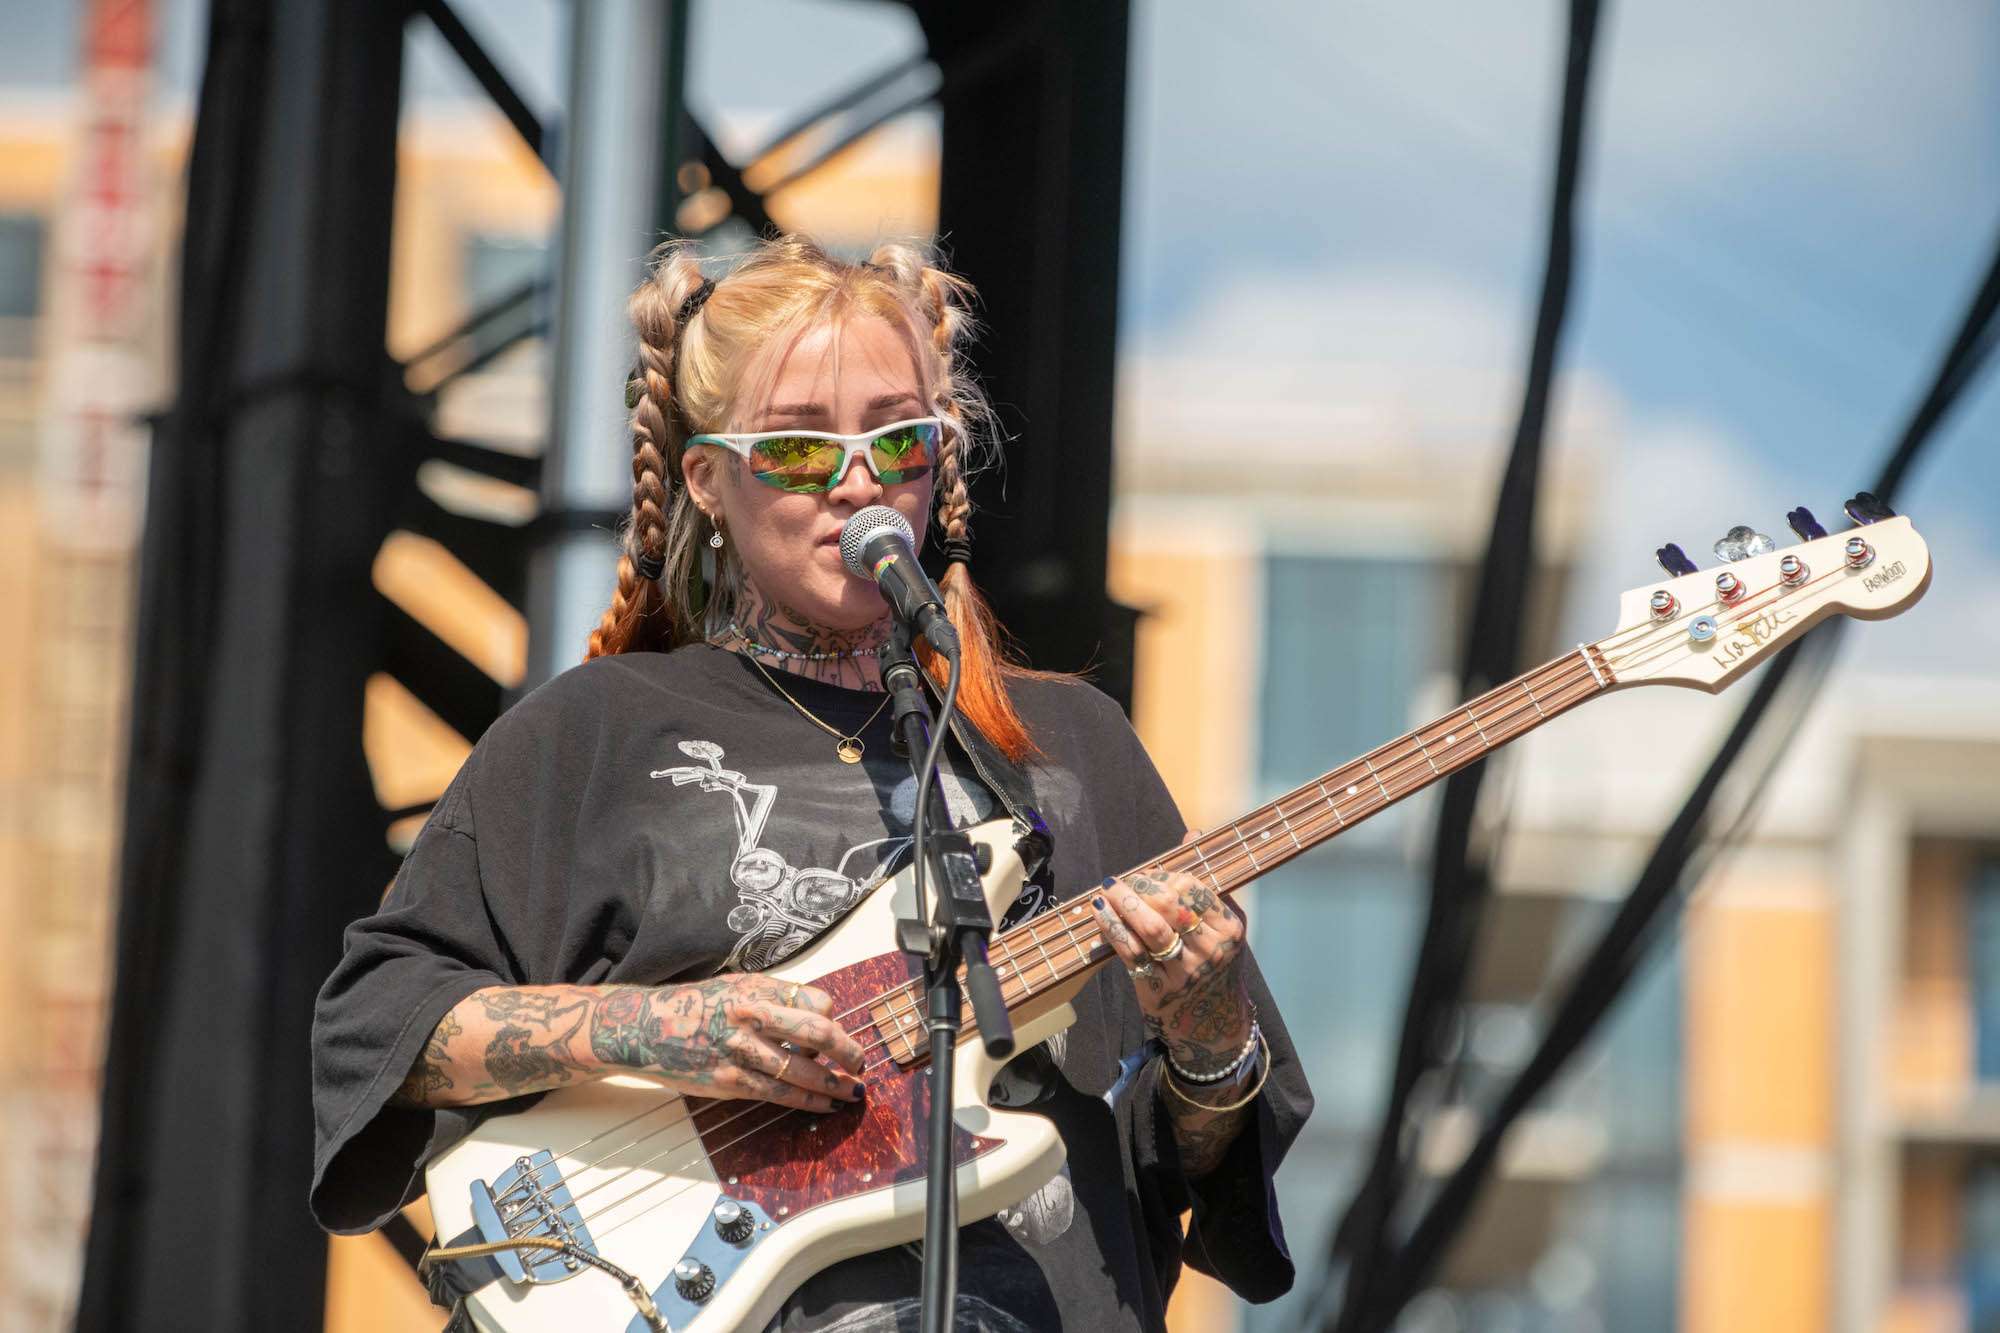 DEHD Live at Pitchfork [GALLERY] 7